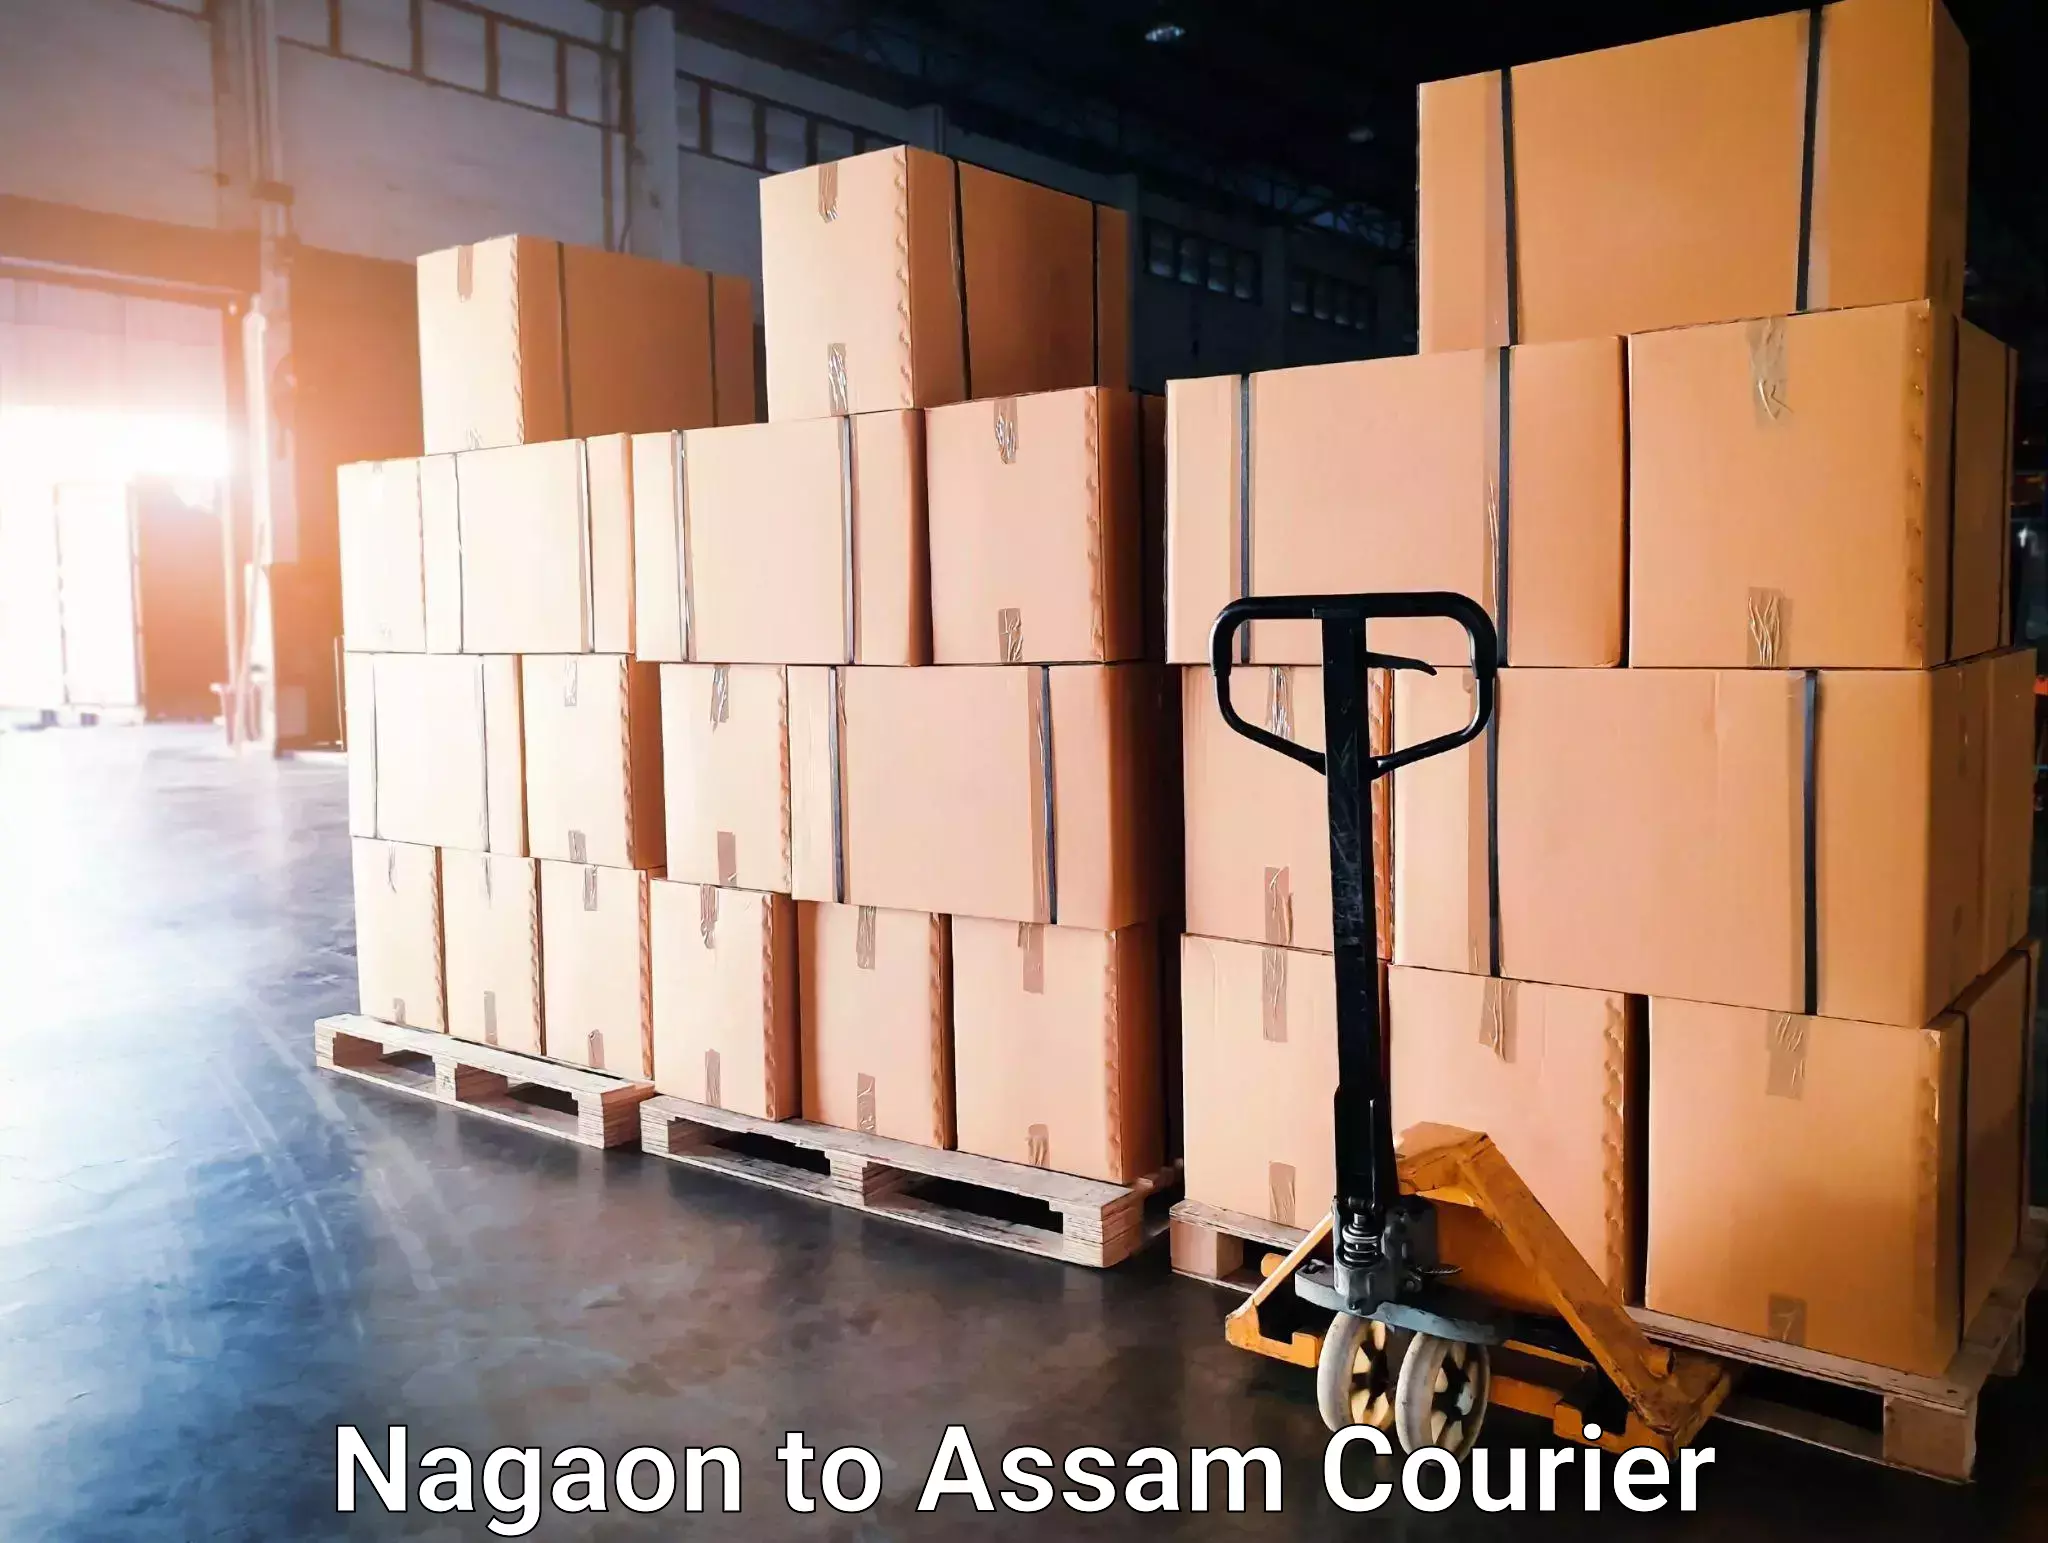 Optimized delivery routes in Nagaon to Guwahati University